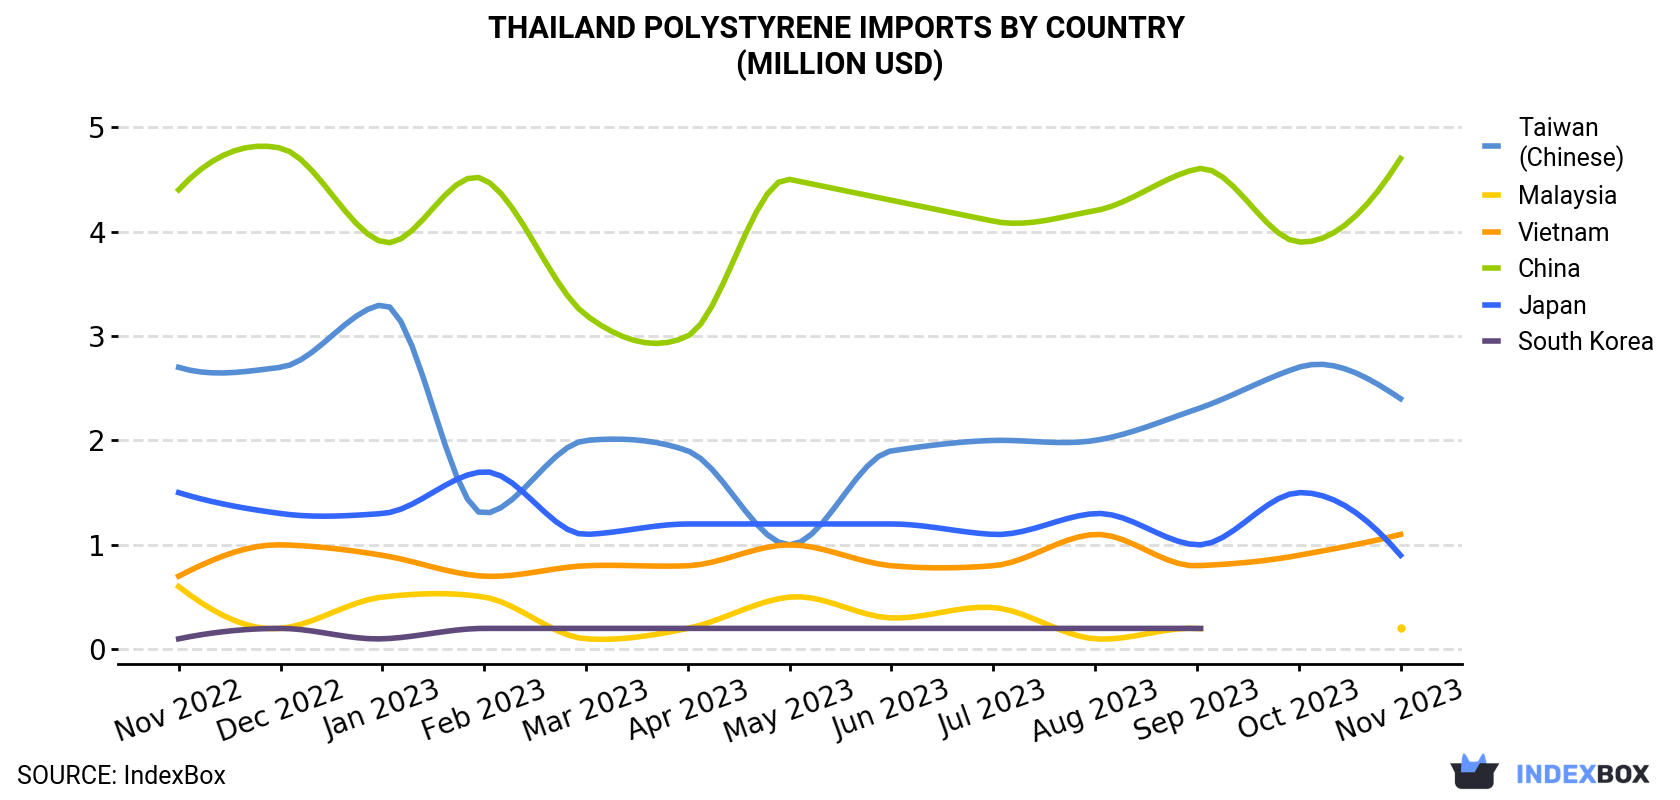 Thailand Polystyrene Imports By Country (Million USD)